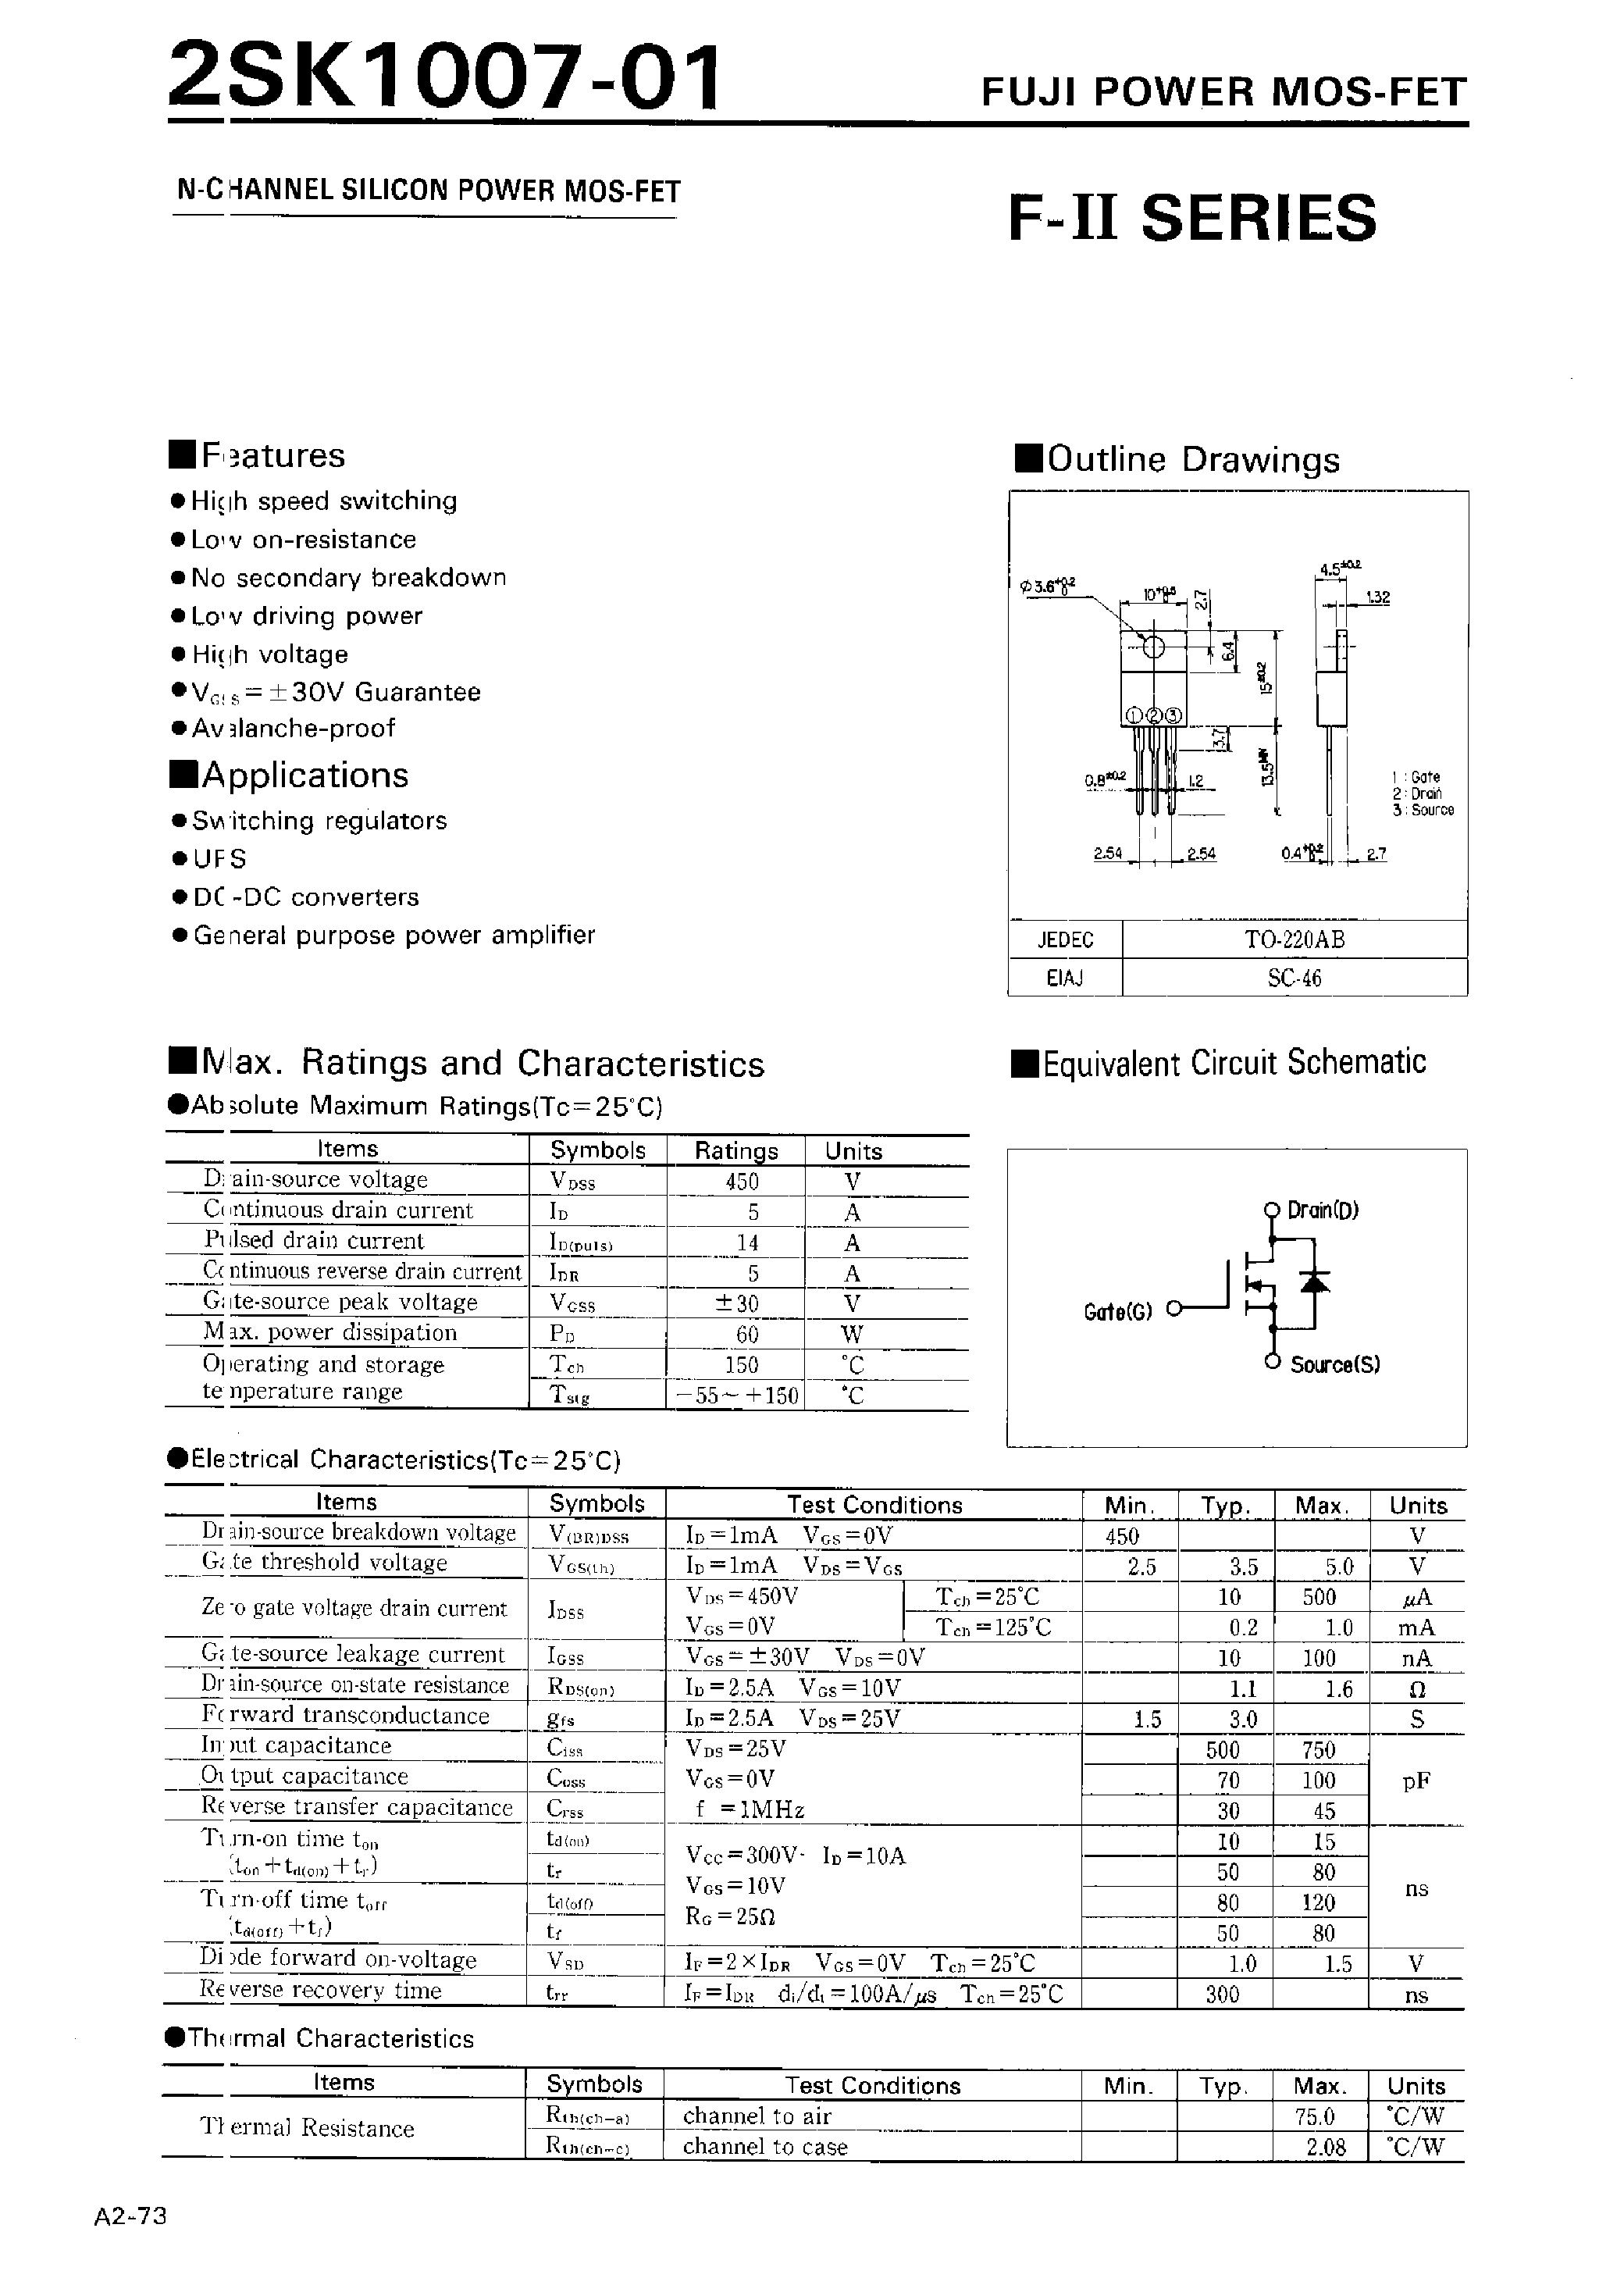 Datasheet 2SK1007-01 - N-CHANNEL SILICON POWER MOSFET page 1